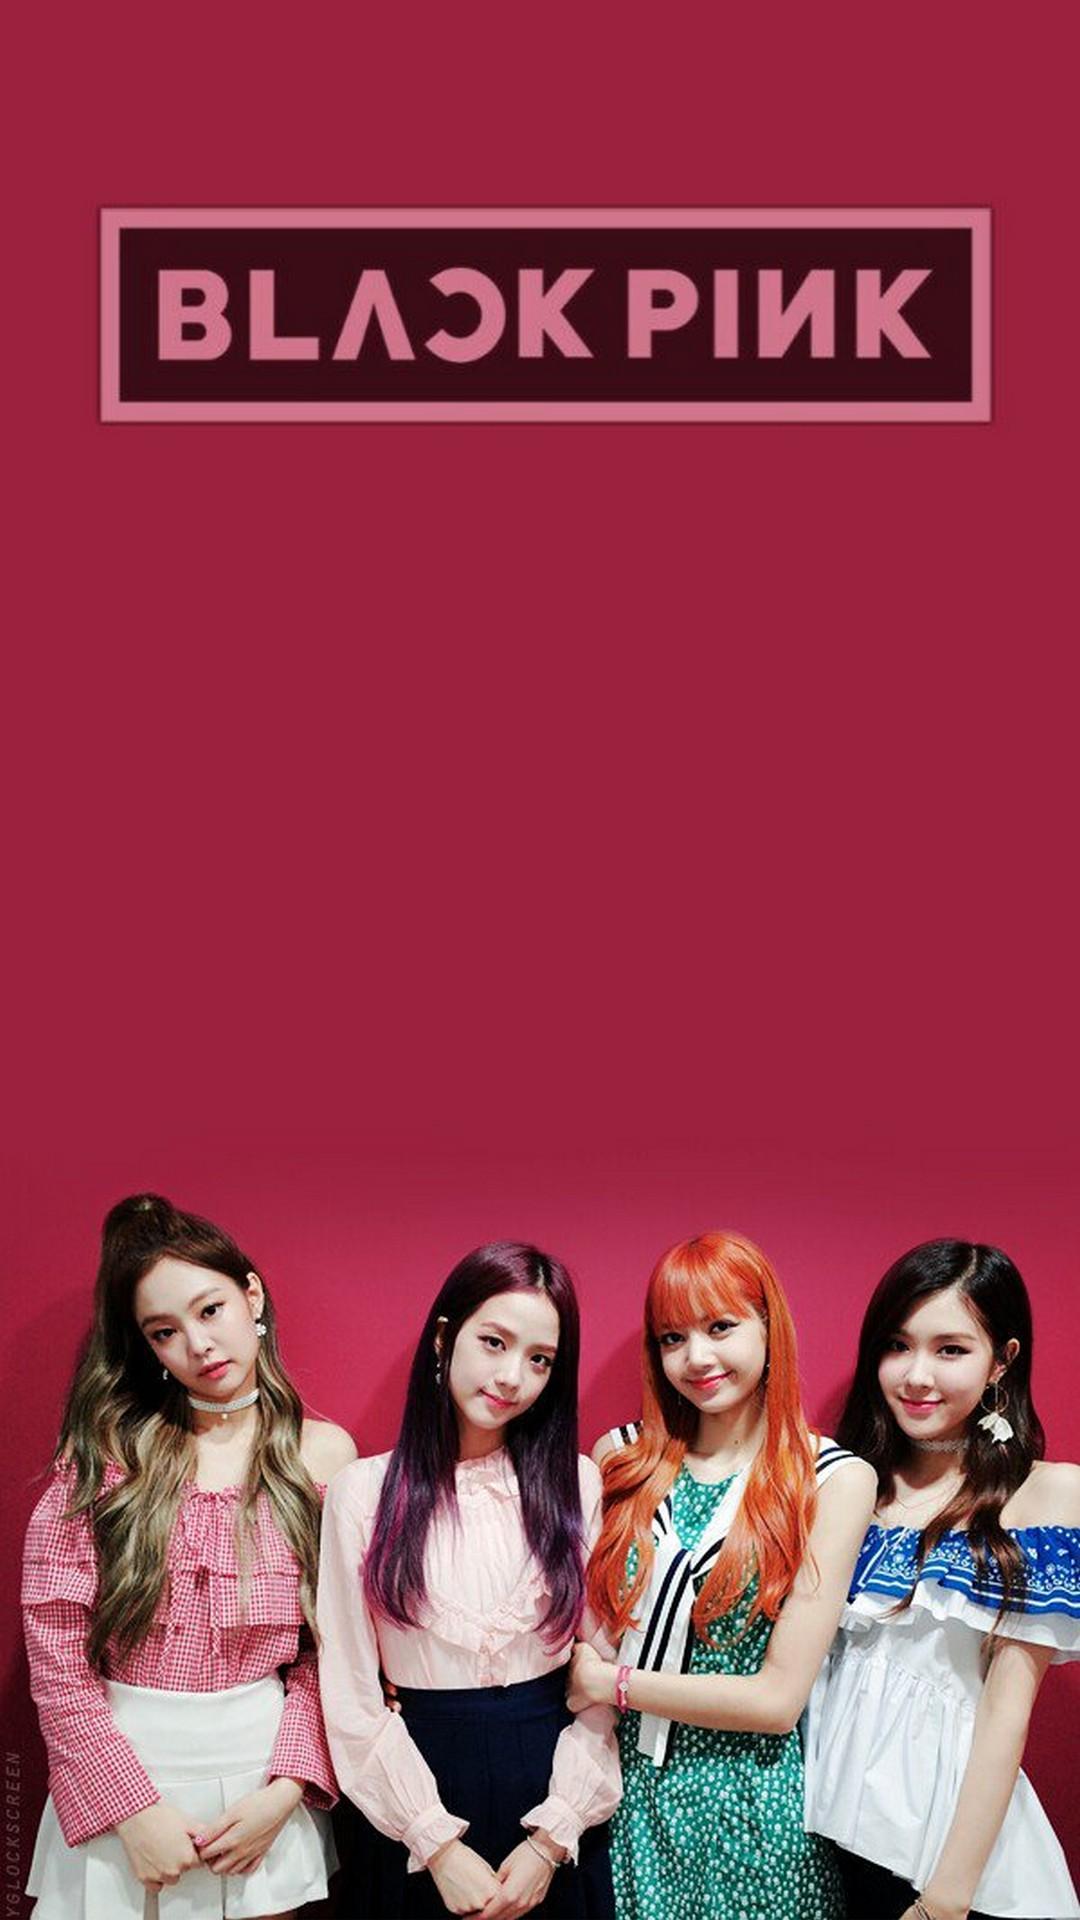 Blackpink For Android Wallpapers - Wallpaper Cave - 1080 x 1920 jpeg 153kB